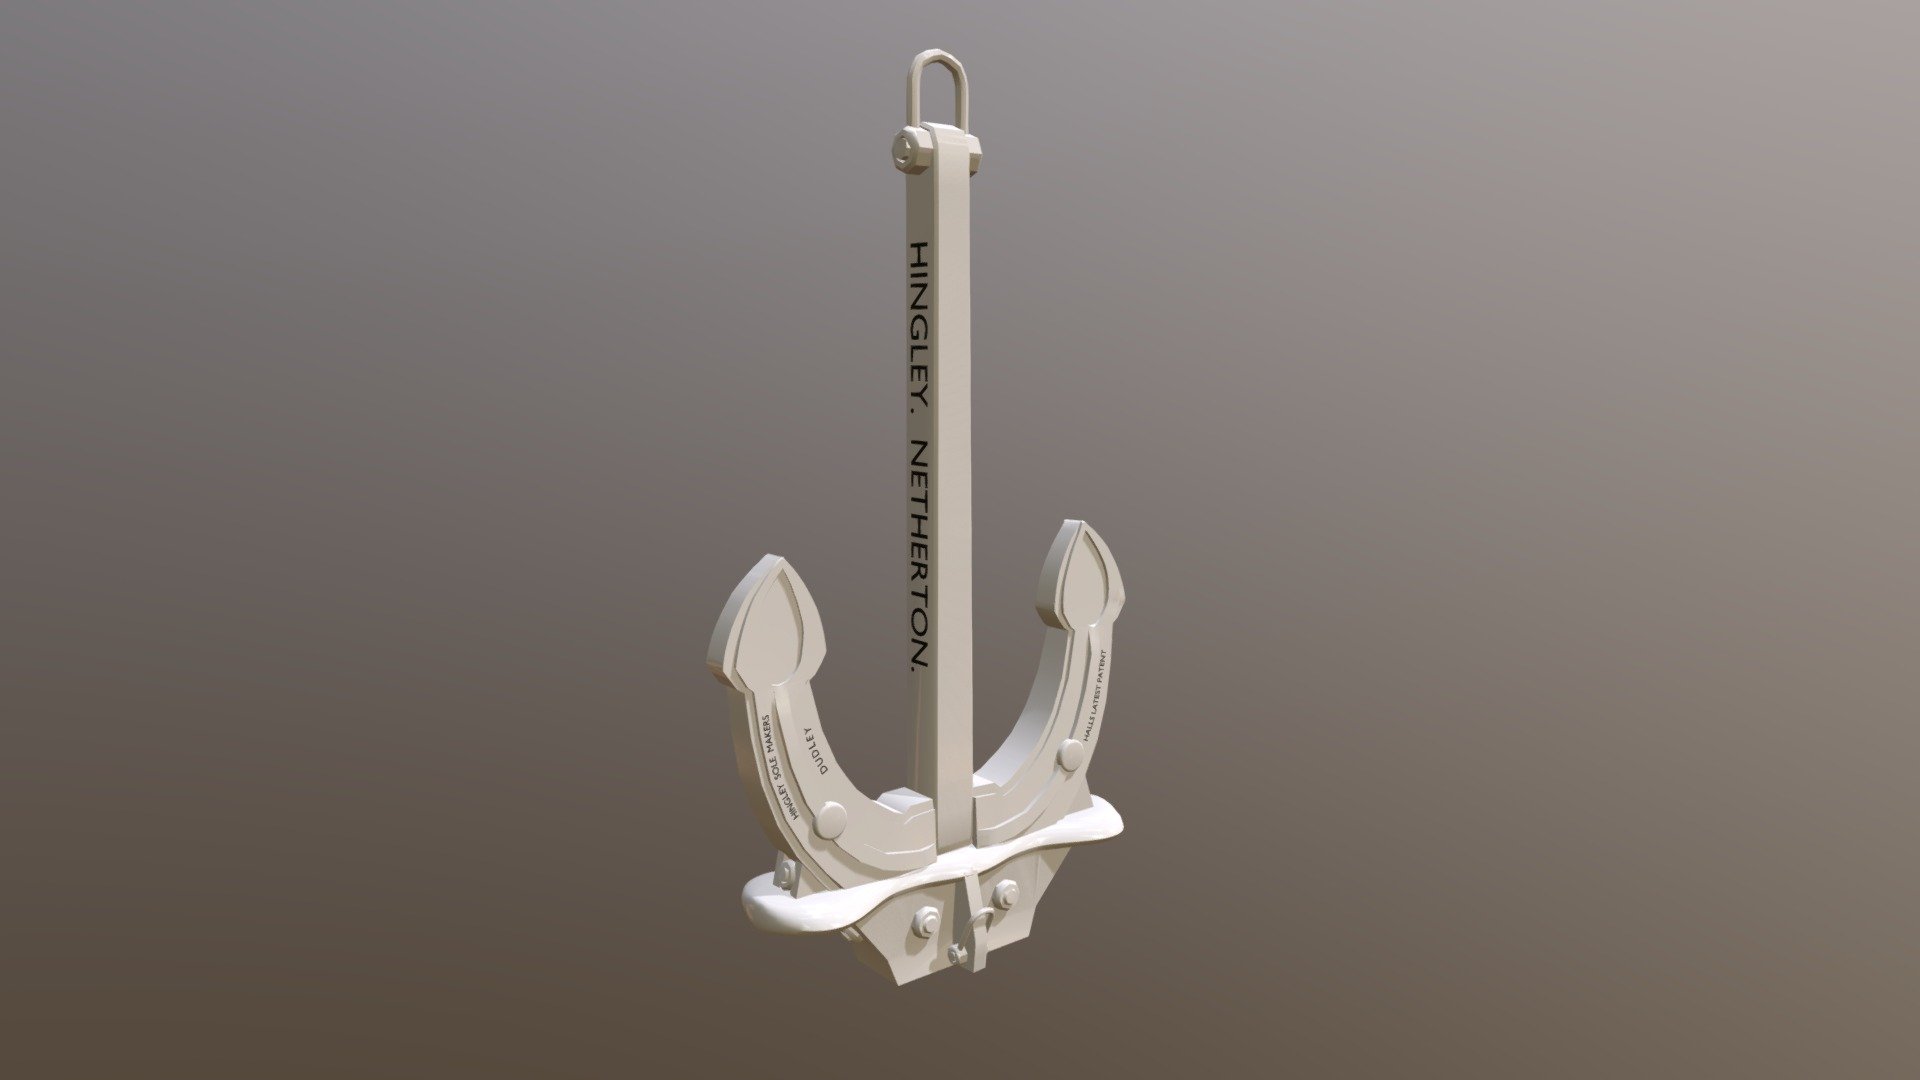 Hingley anchor white
Game ready model for unreal, unity engine. For scenes, videos, games.
Wheels with origins for animations
2k PBR  textures in substance painter
gizmos ready - Hingley anchor white - Buy Royalty Free 3D model by Thomas Binder (@bindertom61) 3d model